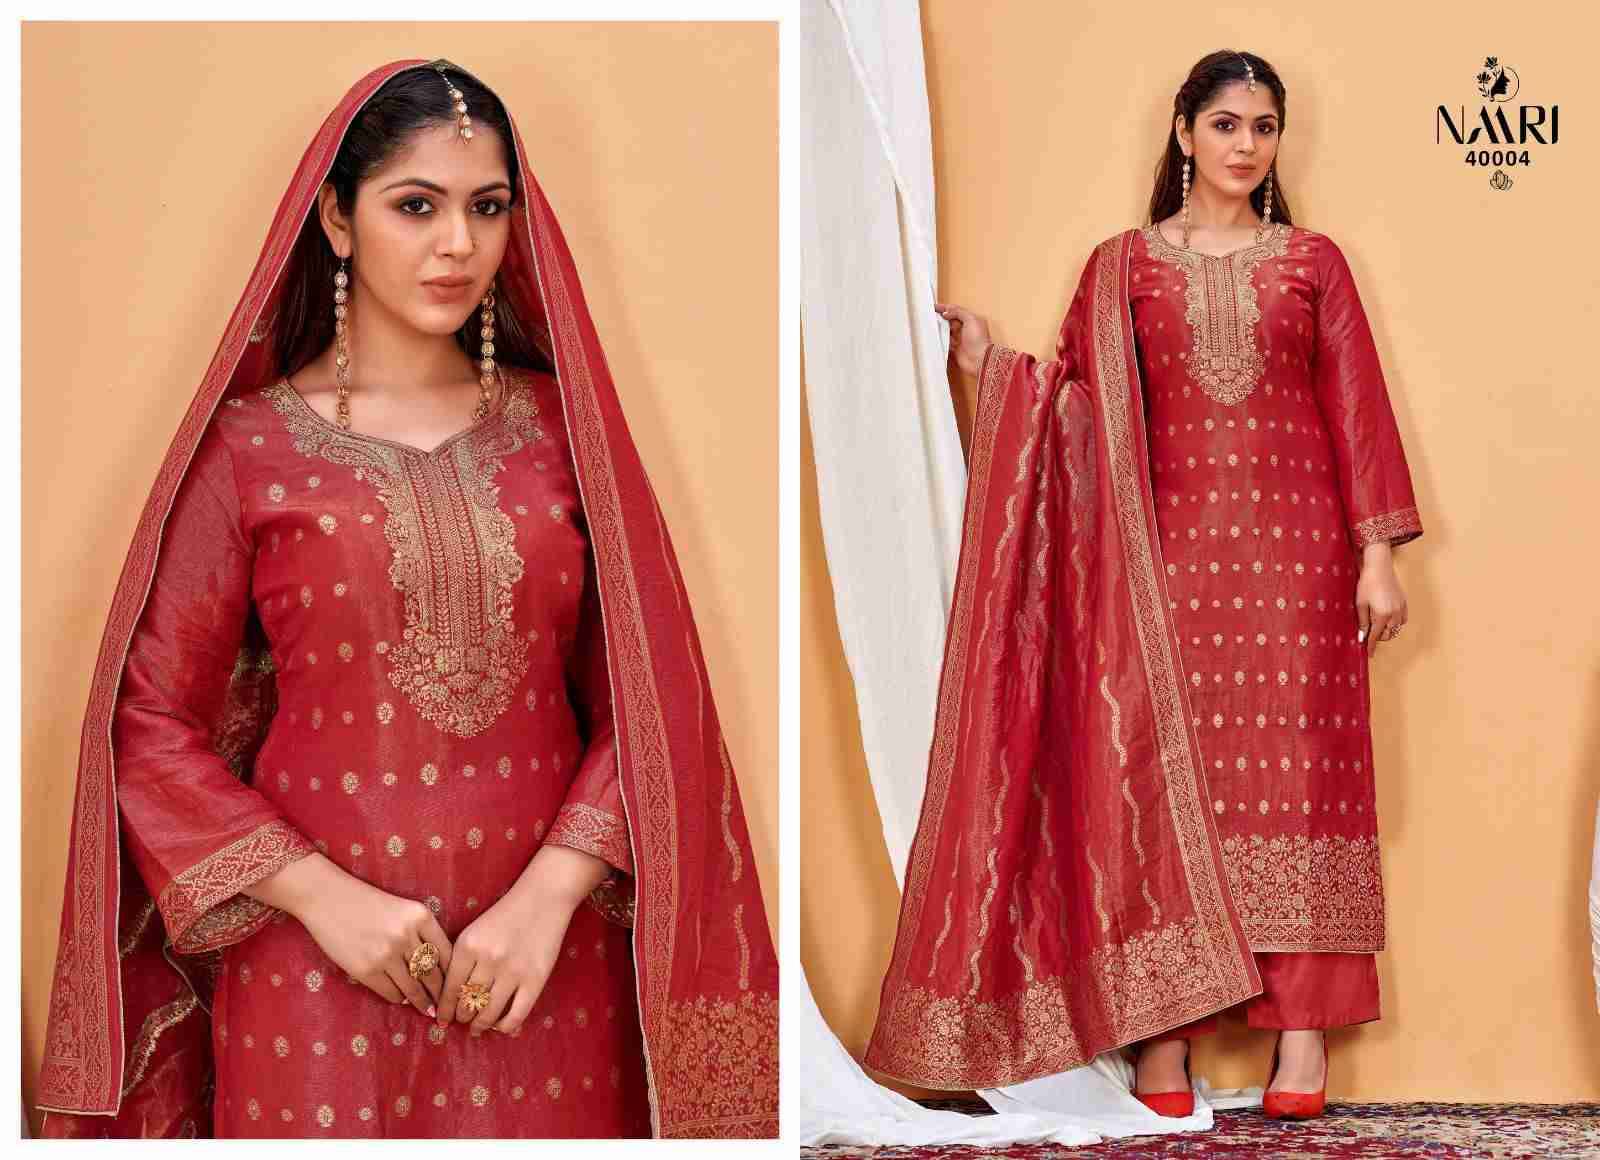 Safari Gold By Naari 40001 To 40004 Series Beautiful Festive Suits Colorful Stylish Fancy Casual Wear & Ethnic Wear Pure Silk Jacquard Embroidered Dresses At Wholesale Price